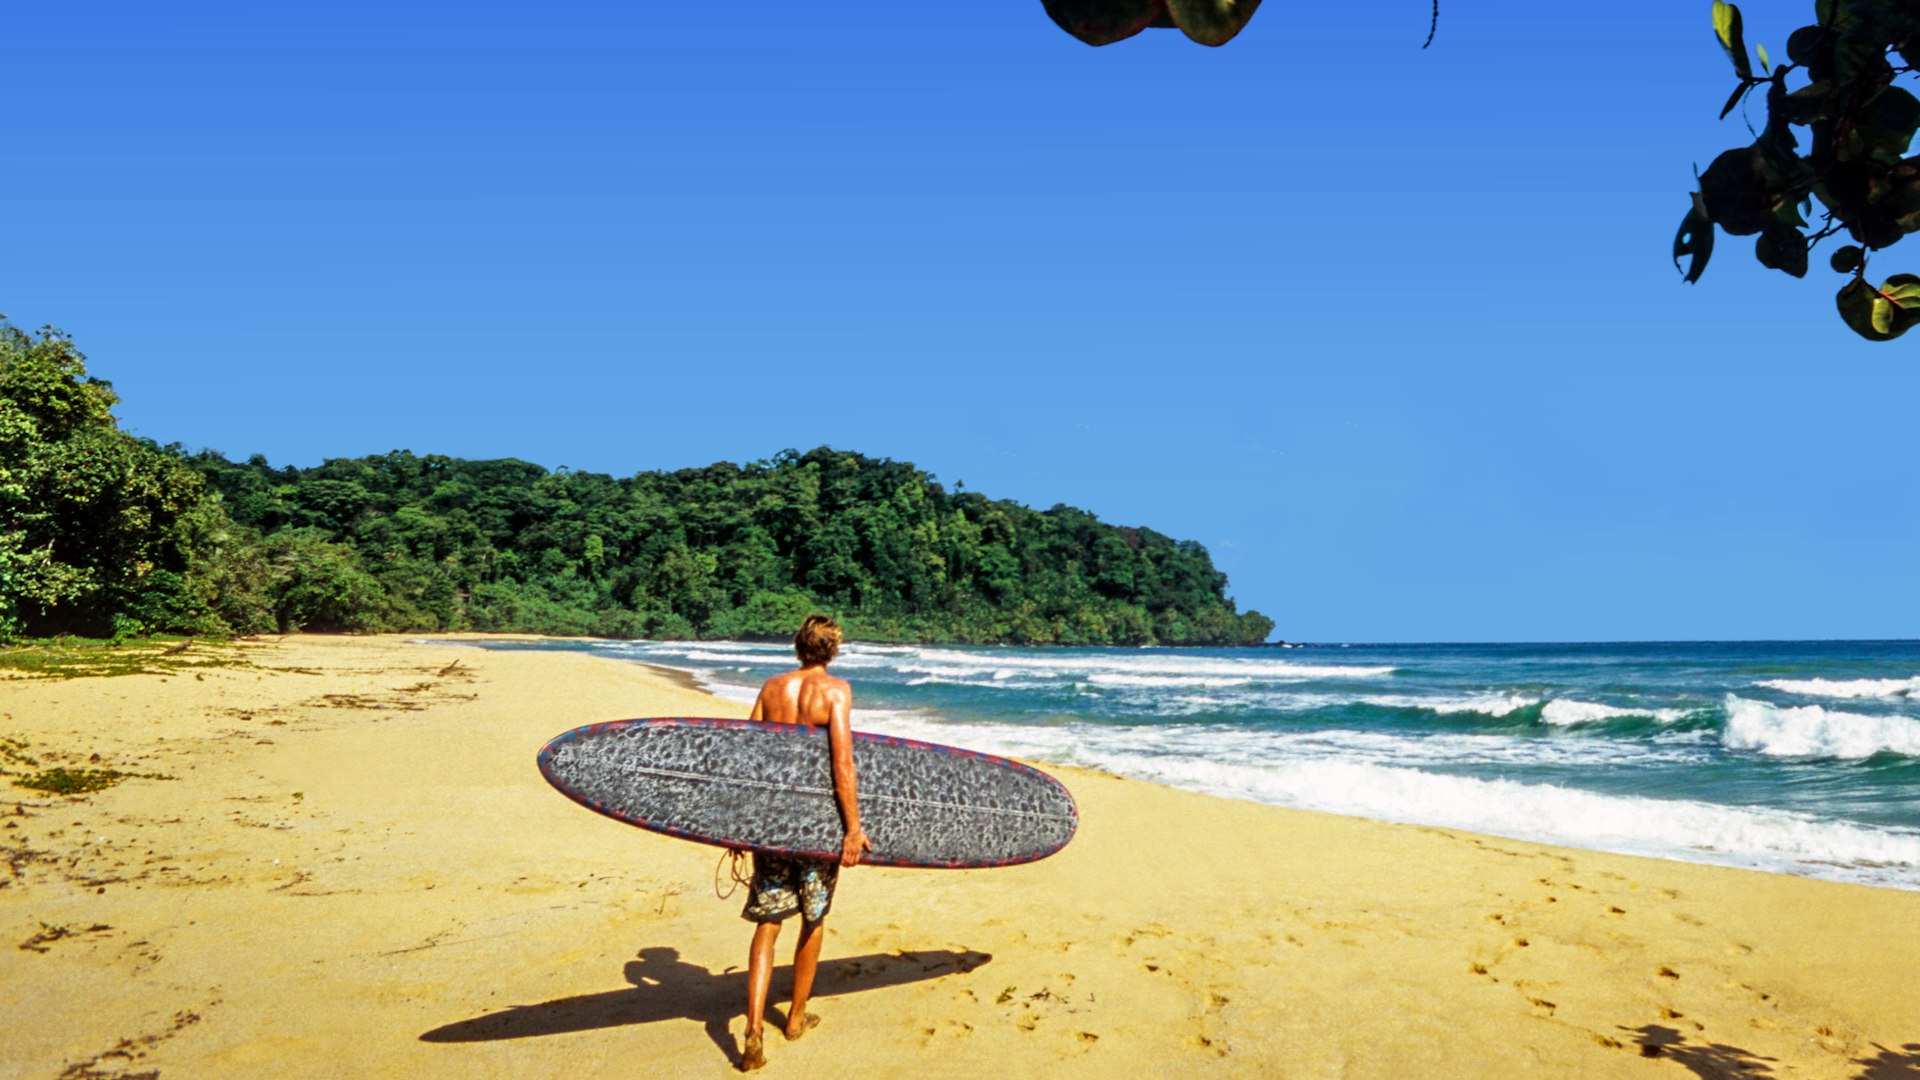 A surfer carrying a board heads to the water at Wizard Beach, Isla Bastimentos, Bocas del Toro, Panama